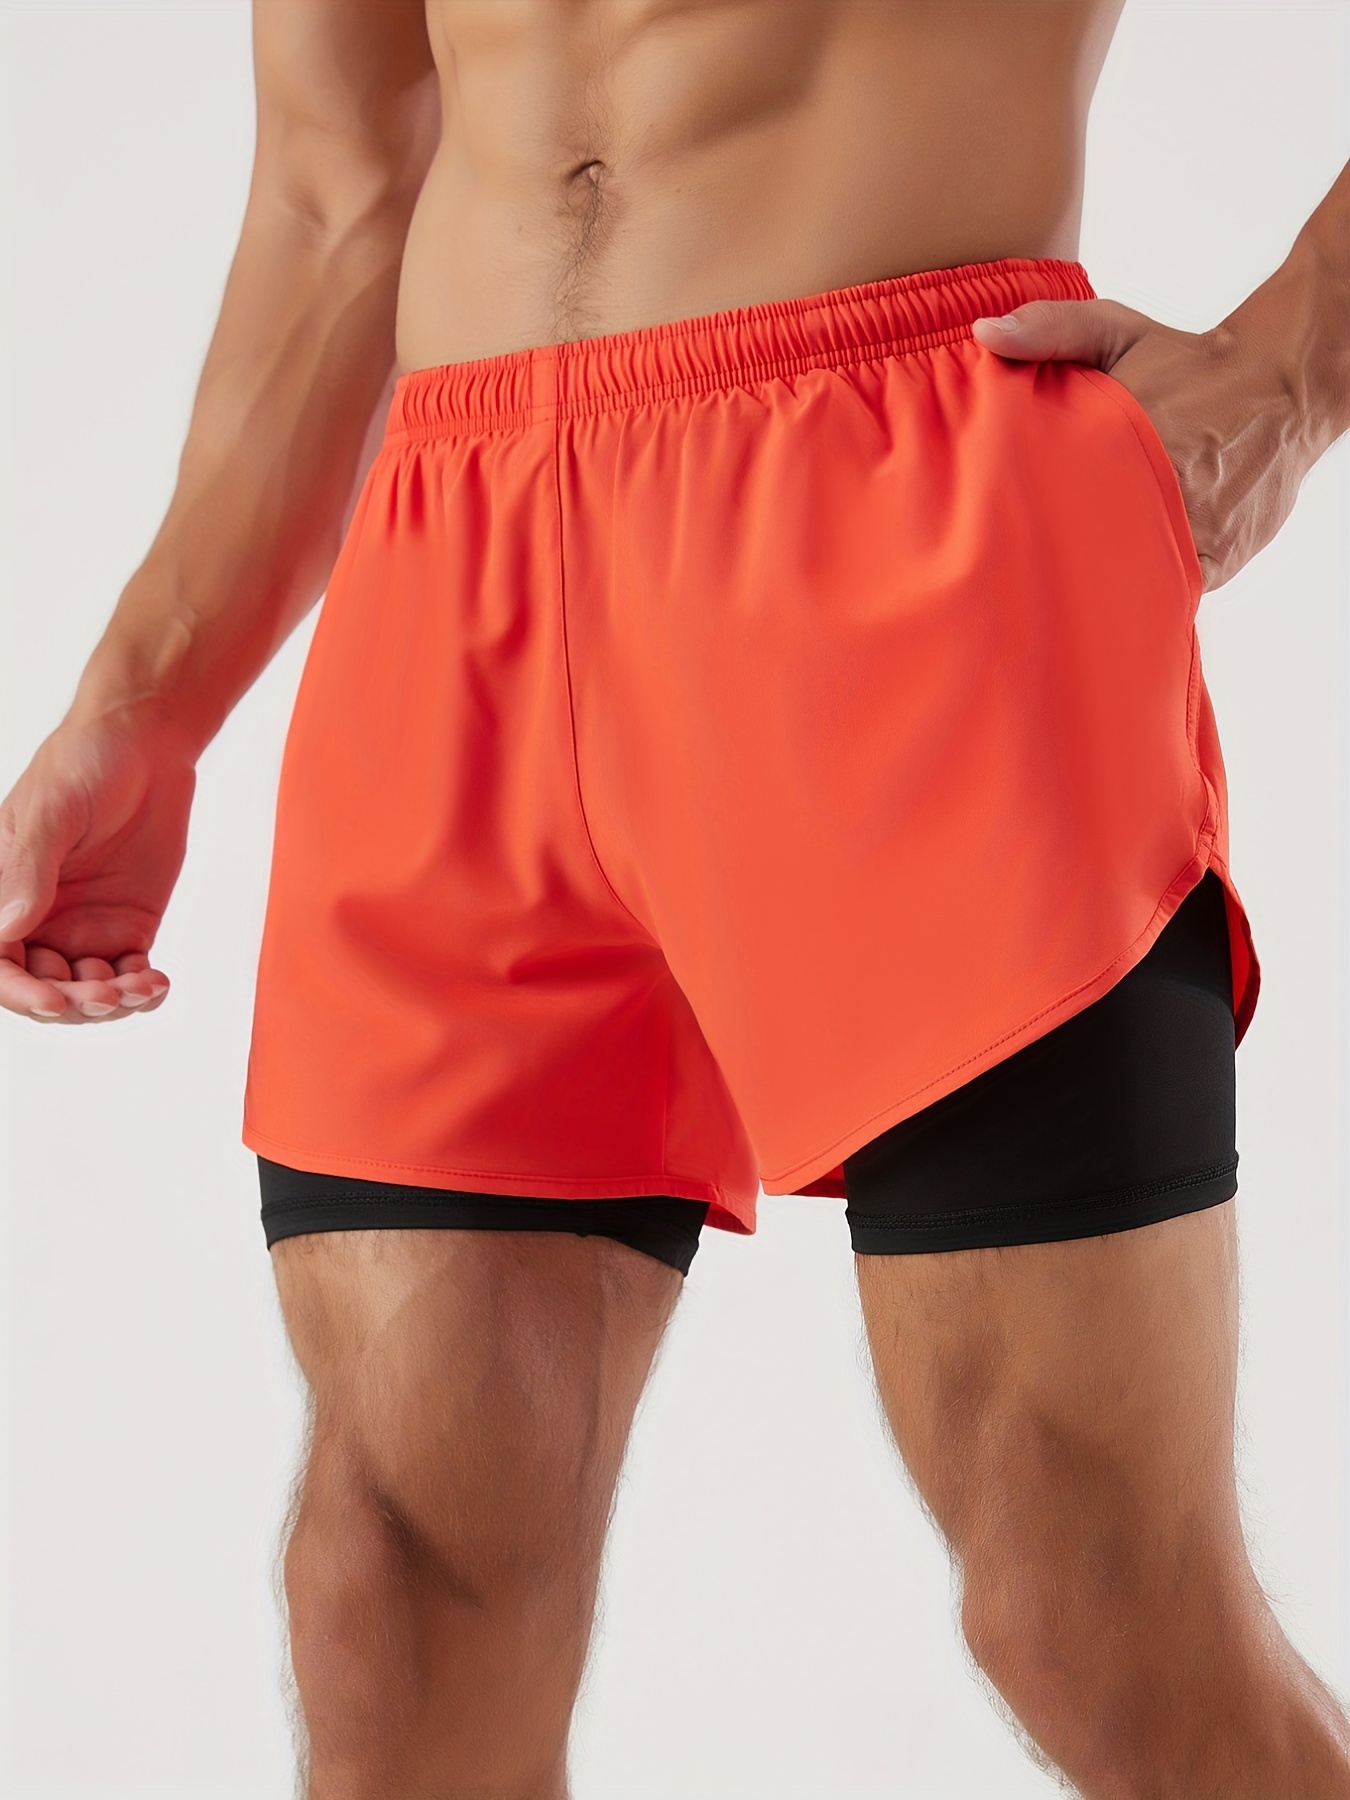 PEASKJP Mens Straight Shorts Athletic Gym Shorts Quick Dry Workout Running  Shorts with Pockets,Orange S